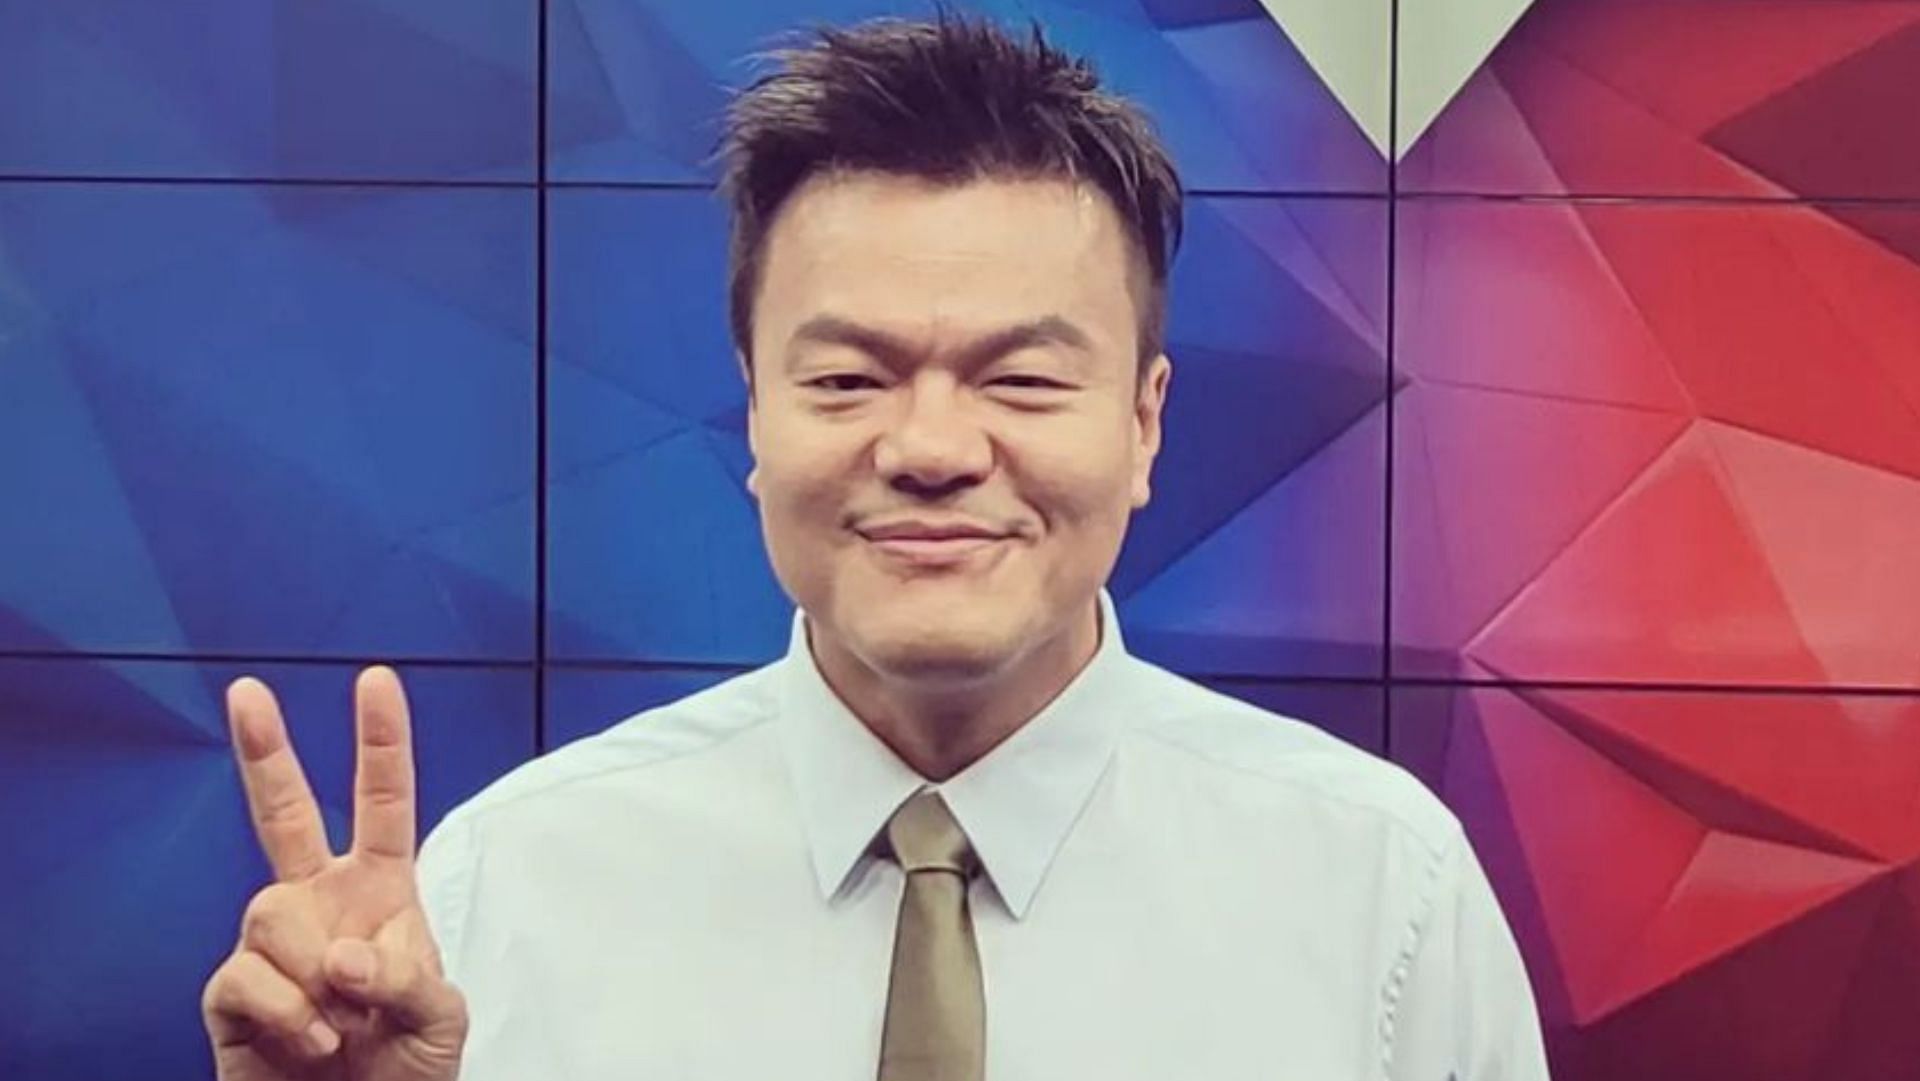 A still of the JYP Entertainment founder Park Jin-young. (Image via Instagram/@asiansoul_jyp)